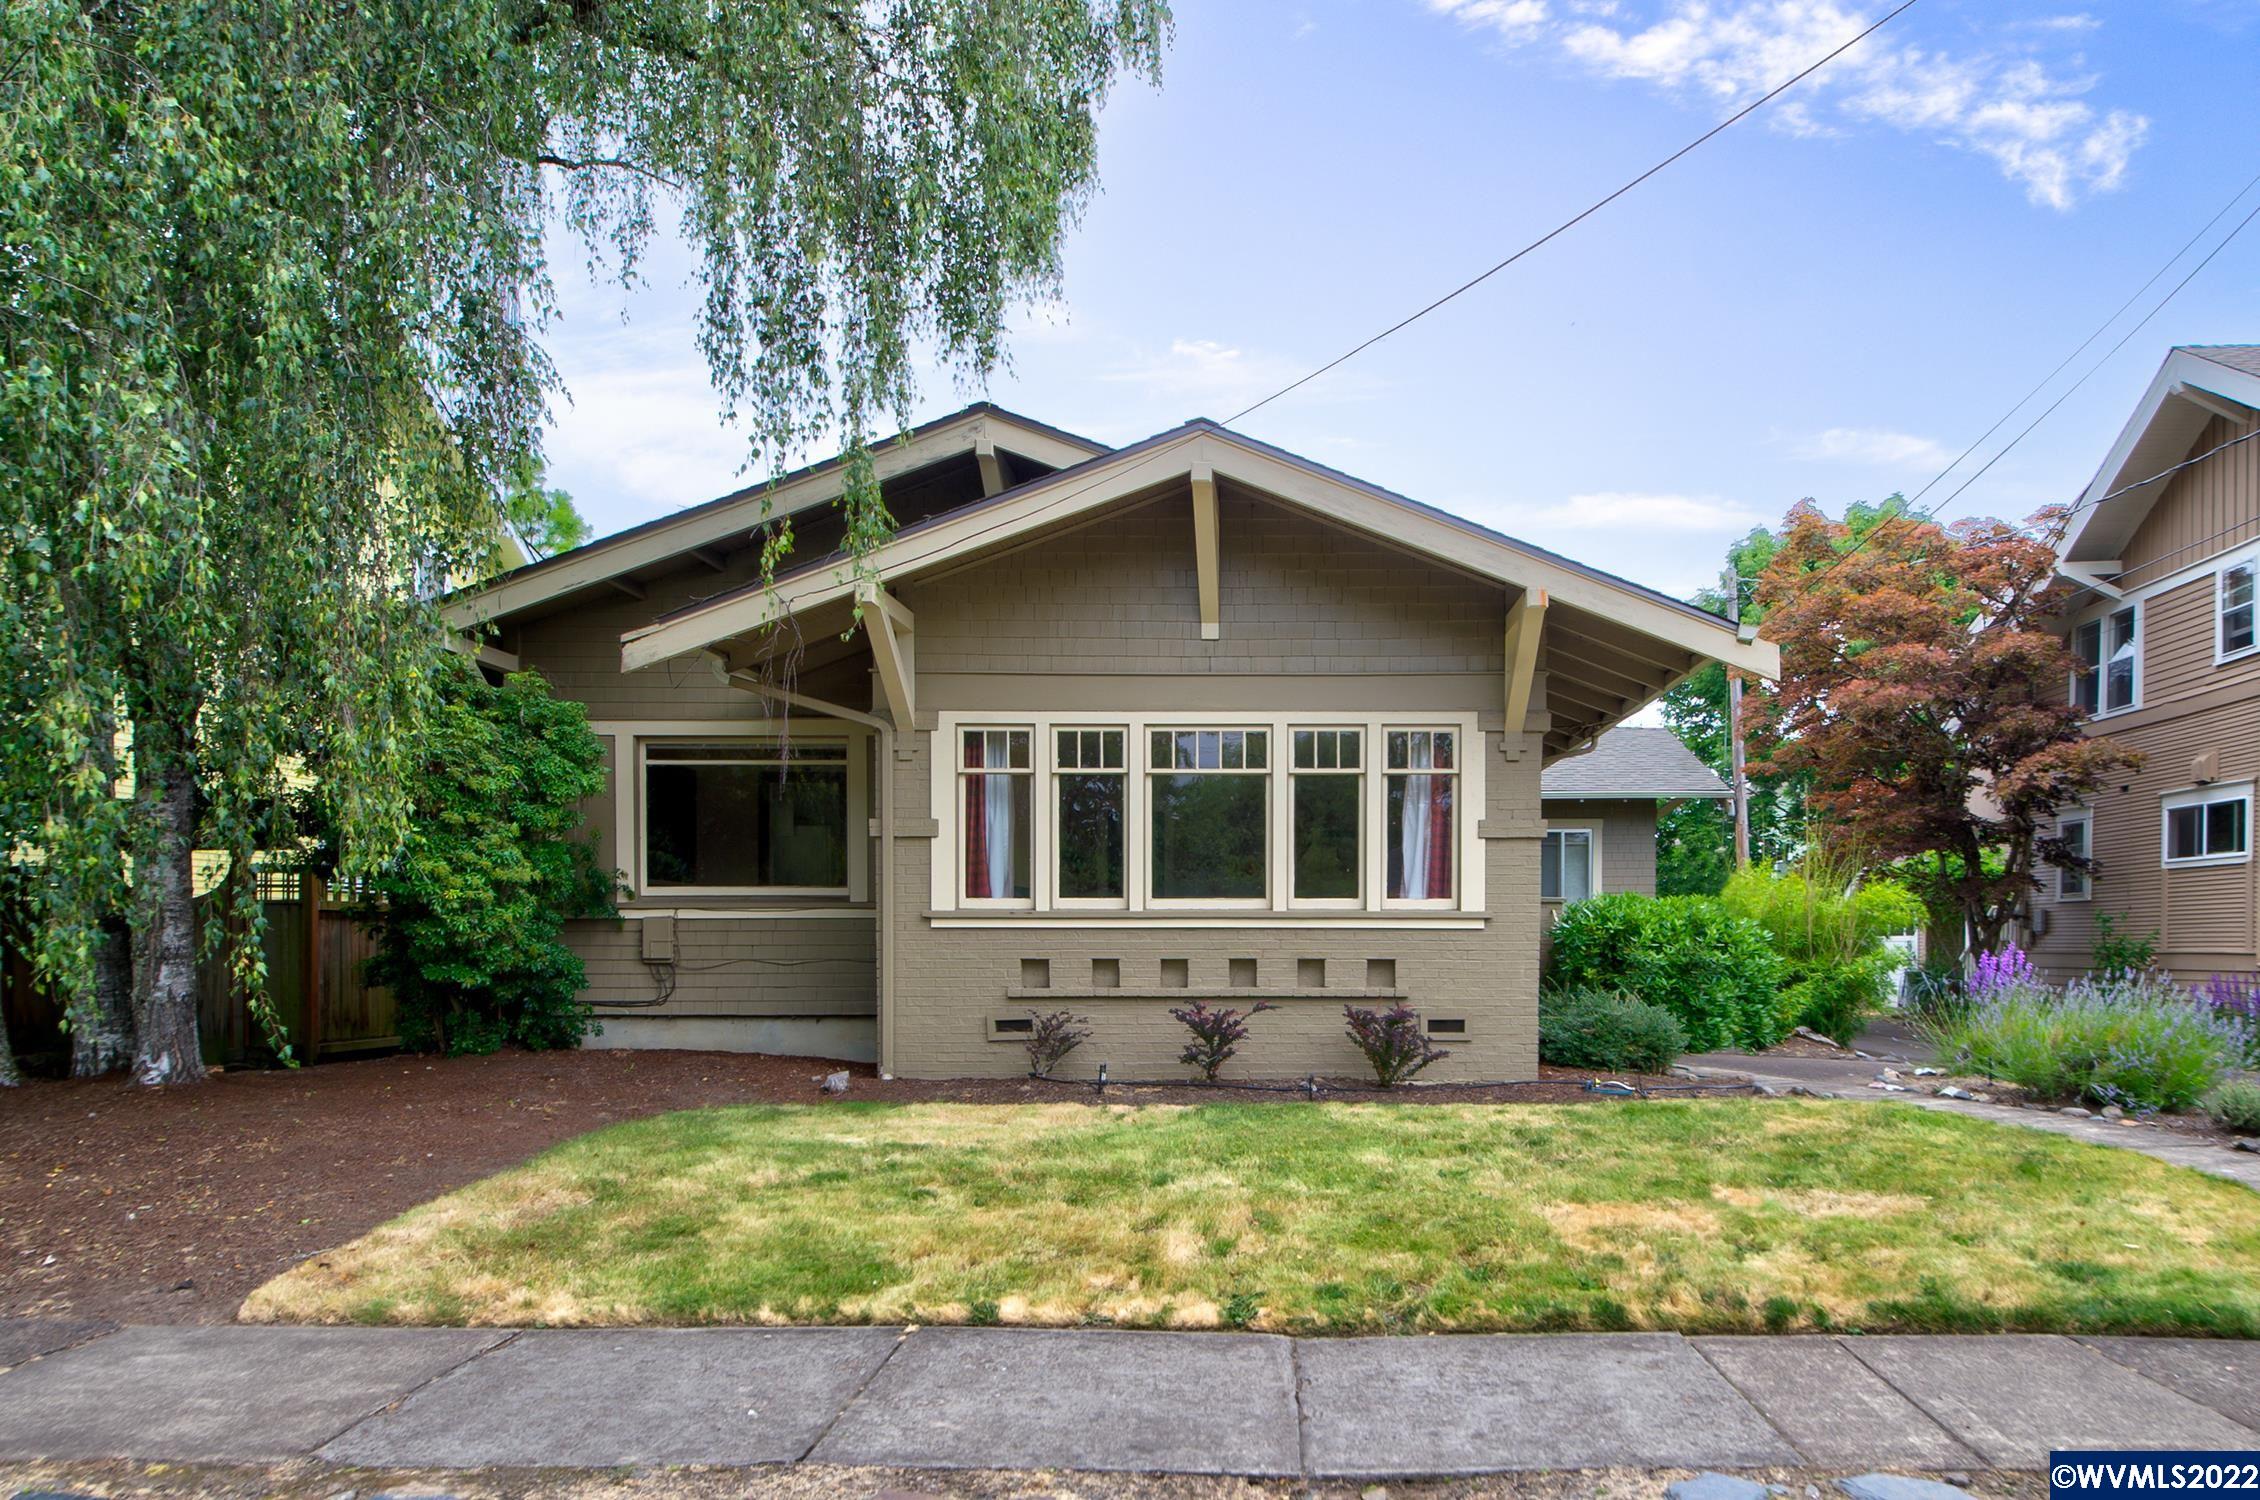 Own the only Arts & Crafts style house in Corvallis! This beautiful home in historic College Hill is close to downtown and OSU. Well maintained with vintage character from built-ins and pocket doors, has been updated with modern touches, fully finished basement with egress windows, new bathroom in primary bedroom, natural light from large windows, beautiful hardwood floors all the character and charm you would expect from this era. plenty of storage and 2 car attached garage.